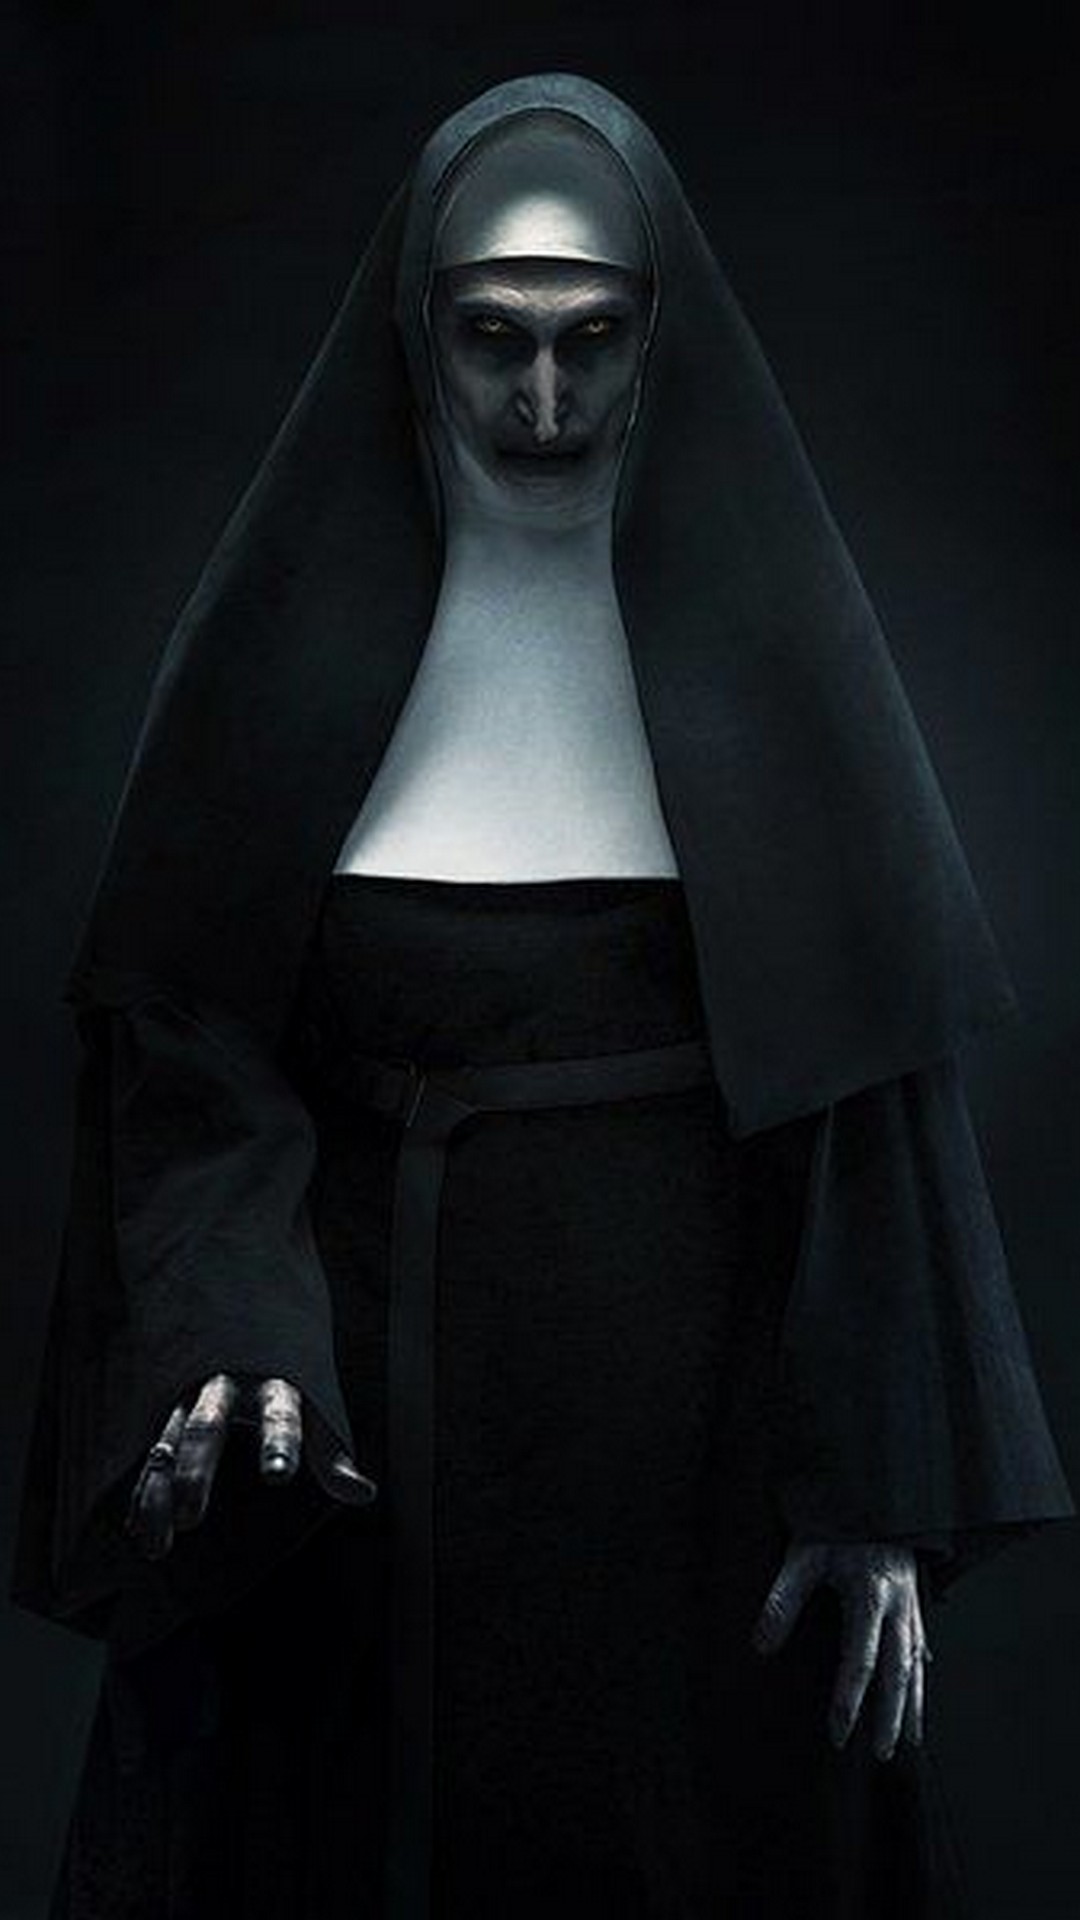 The Nun Valak Wallpaper iPhone with image resolution 1080x1920 pixel. You can make this wallpaper for your iPhone 5, 6, 7, 8, X backgrounds, Mobile Screensaver, or iPad Lock Screen